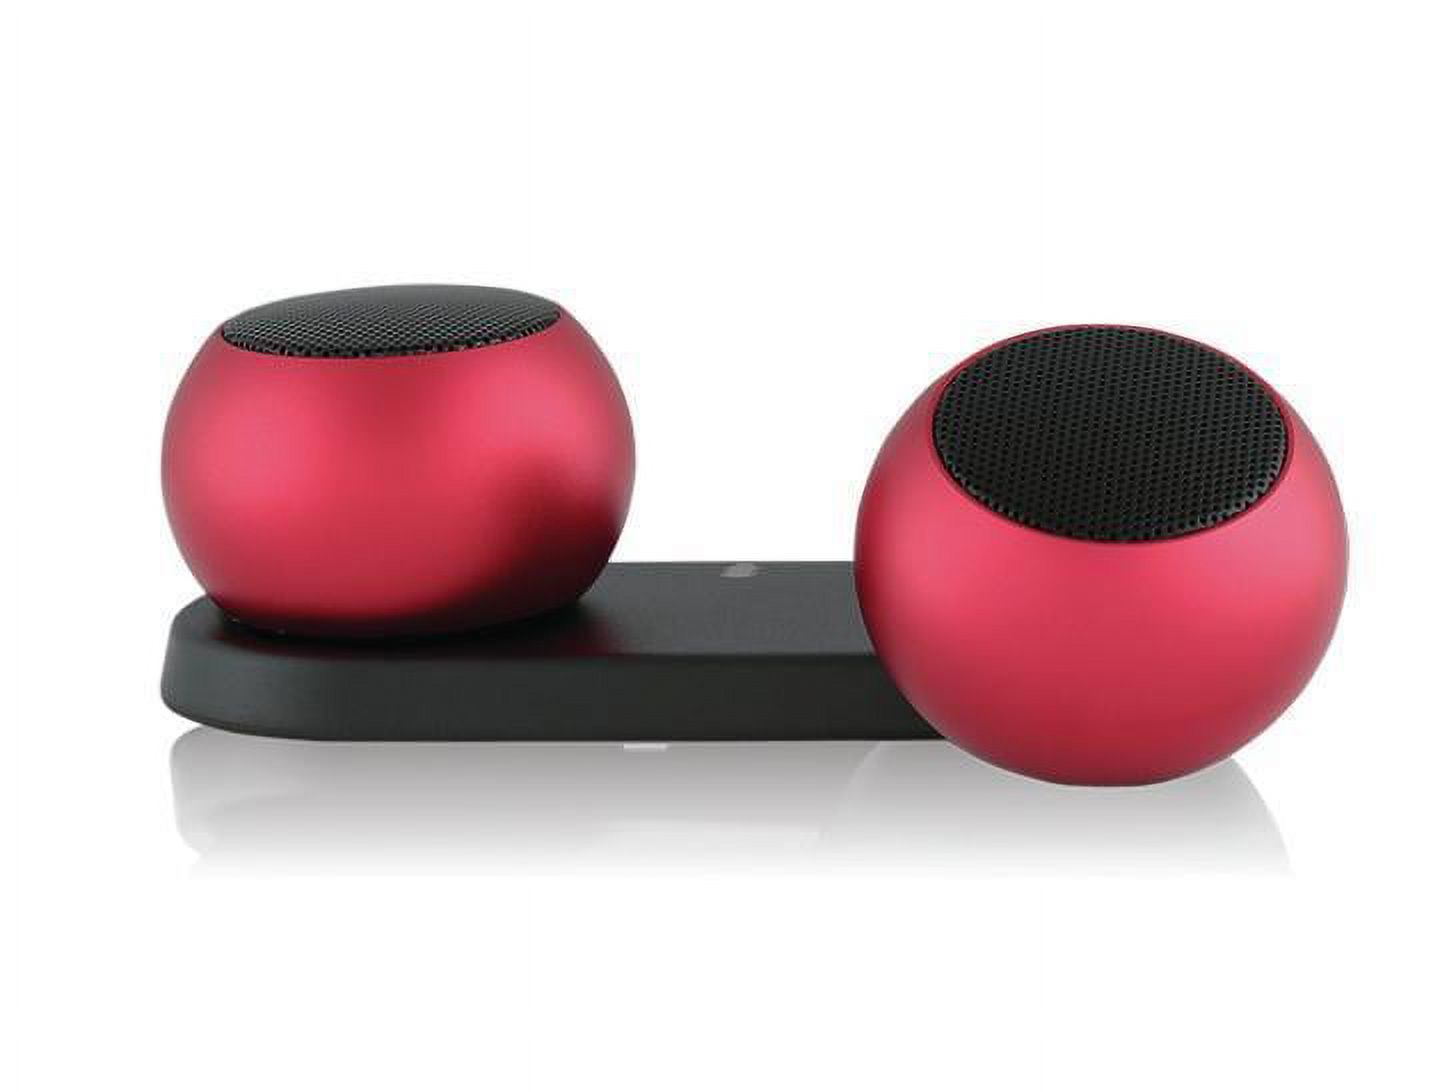 MHM-STEREORED My Heavy Metal Stereo Pair Bluetooth Speaker - Red - image 1 of 1